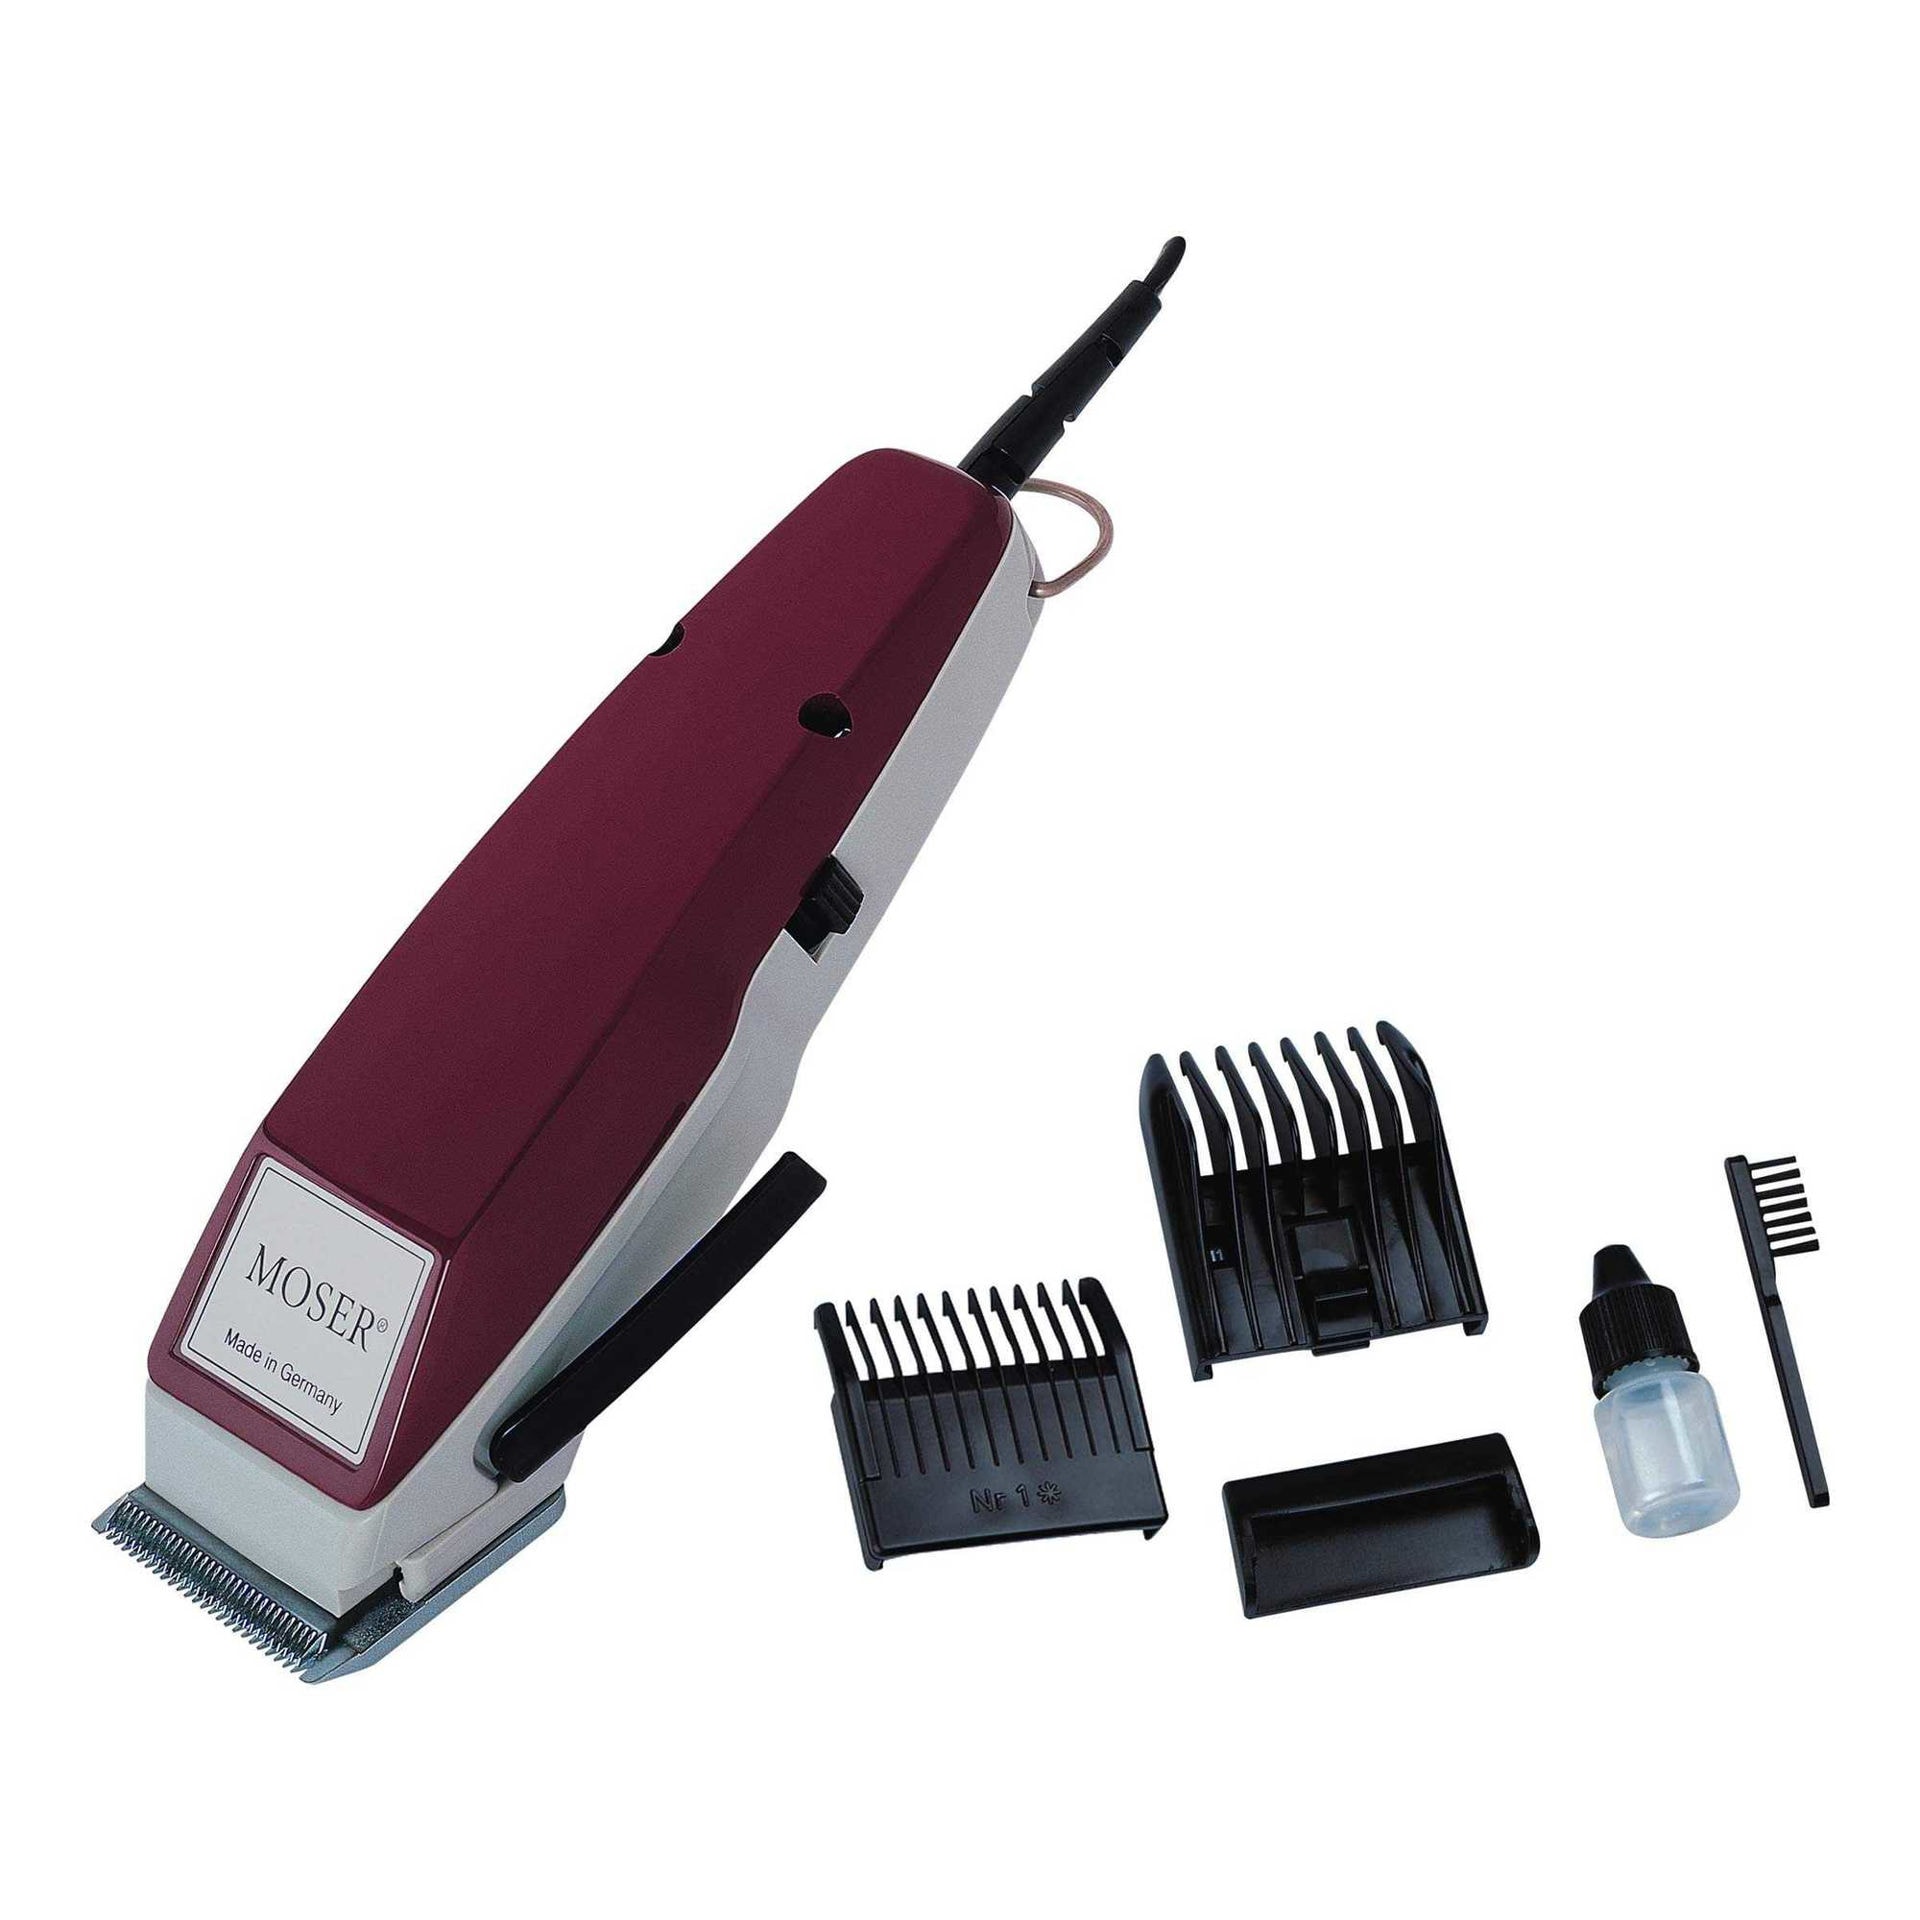 Moser Corded Hair Clipper, 1400-0151, Exclusive C4, 3 Pin, Burgundy